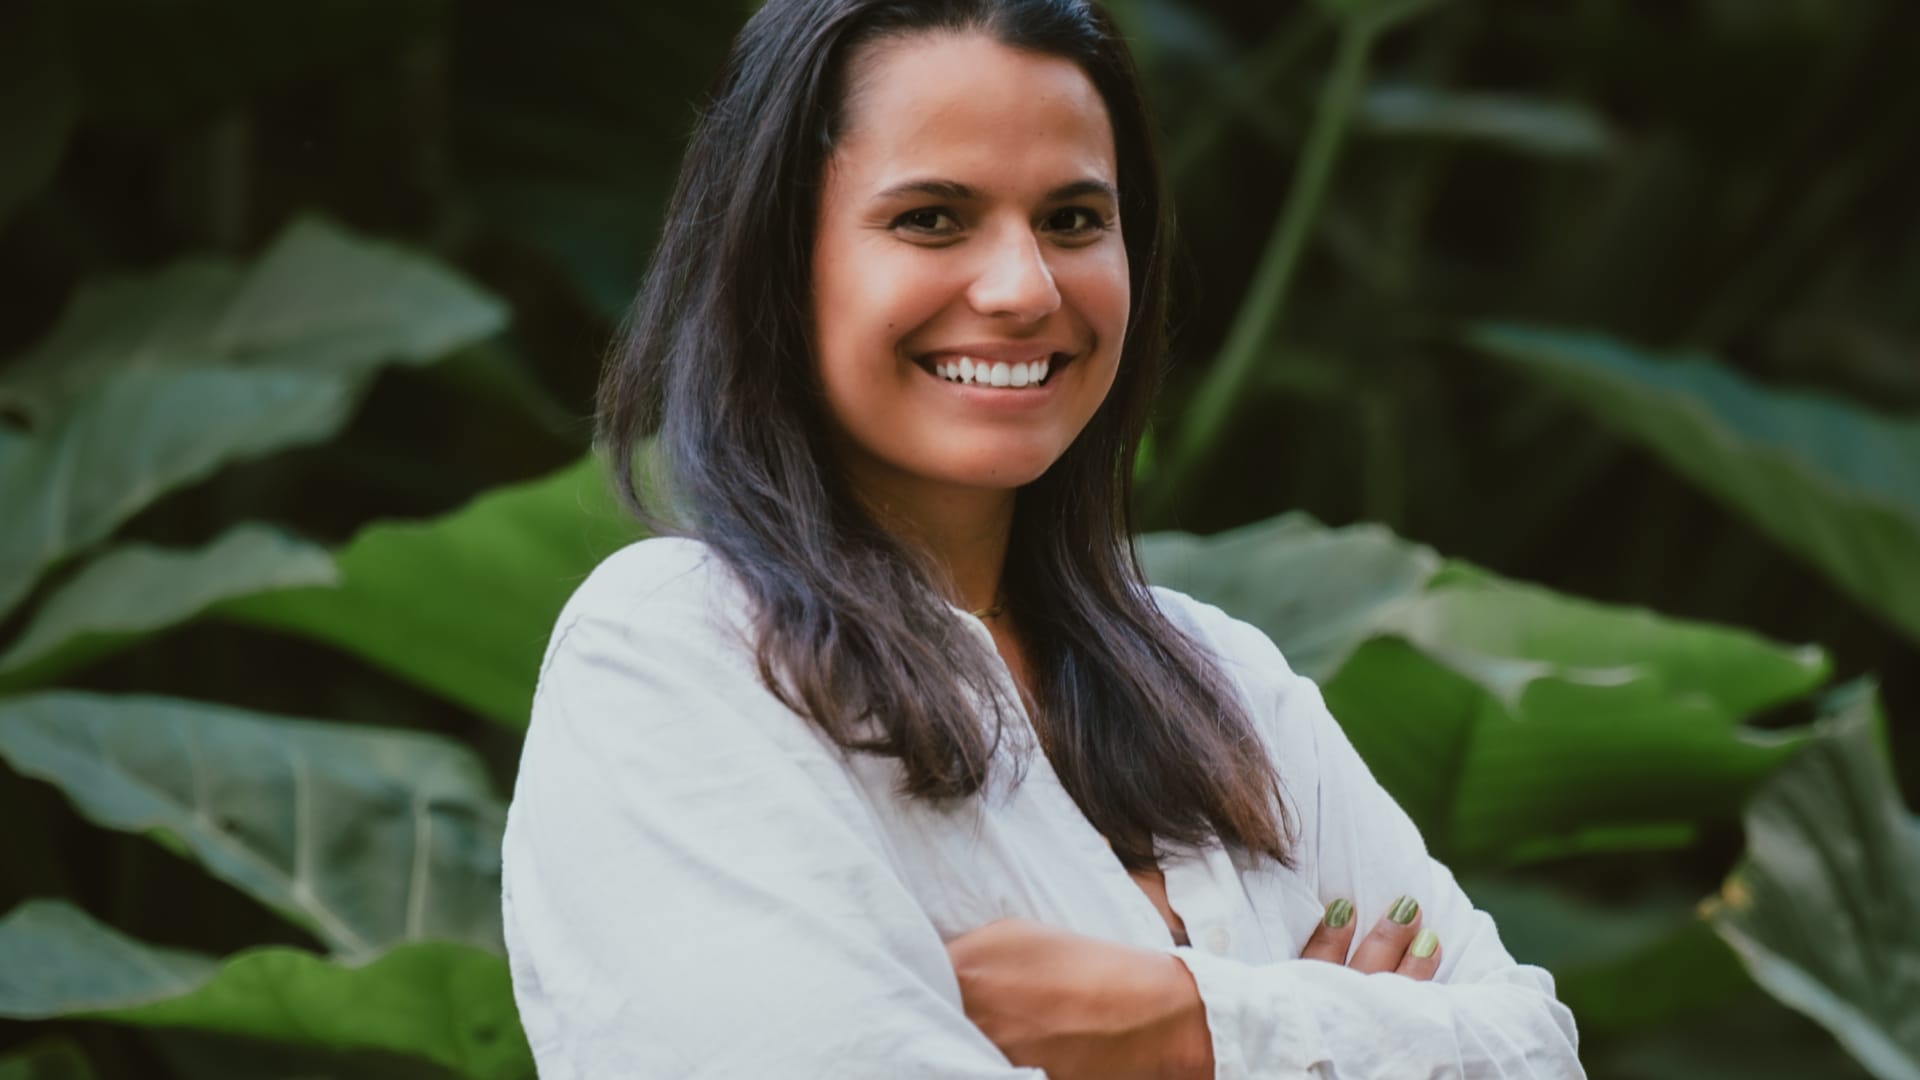 31-year-old mom started her CBD business from home in Hawaii—3 years later, it brings in $100,000 annually